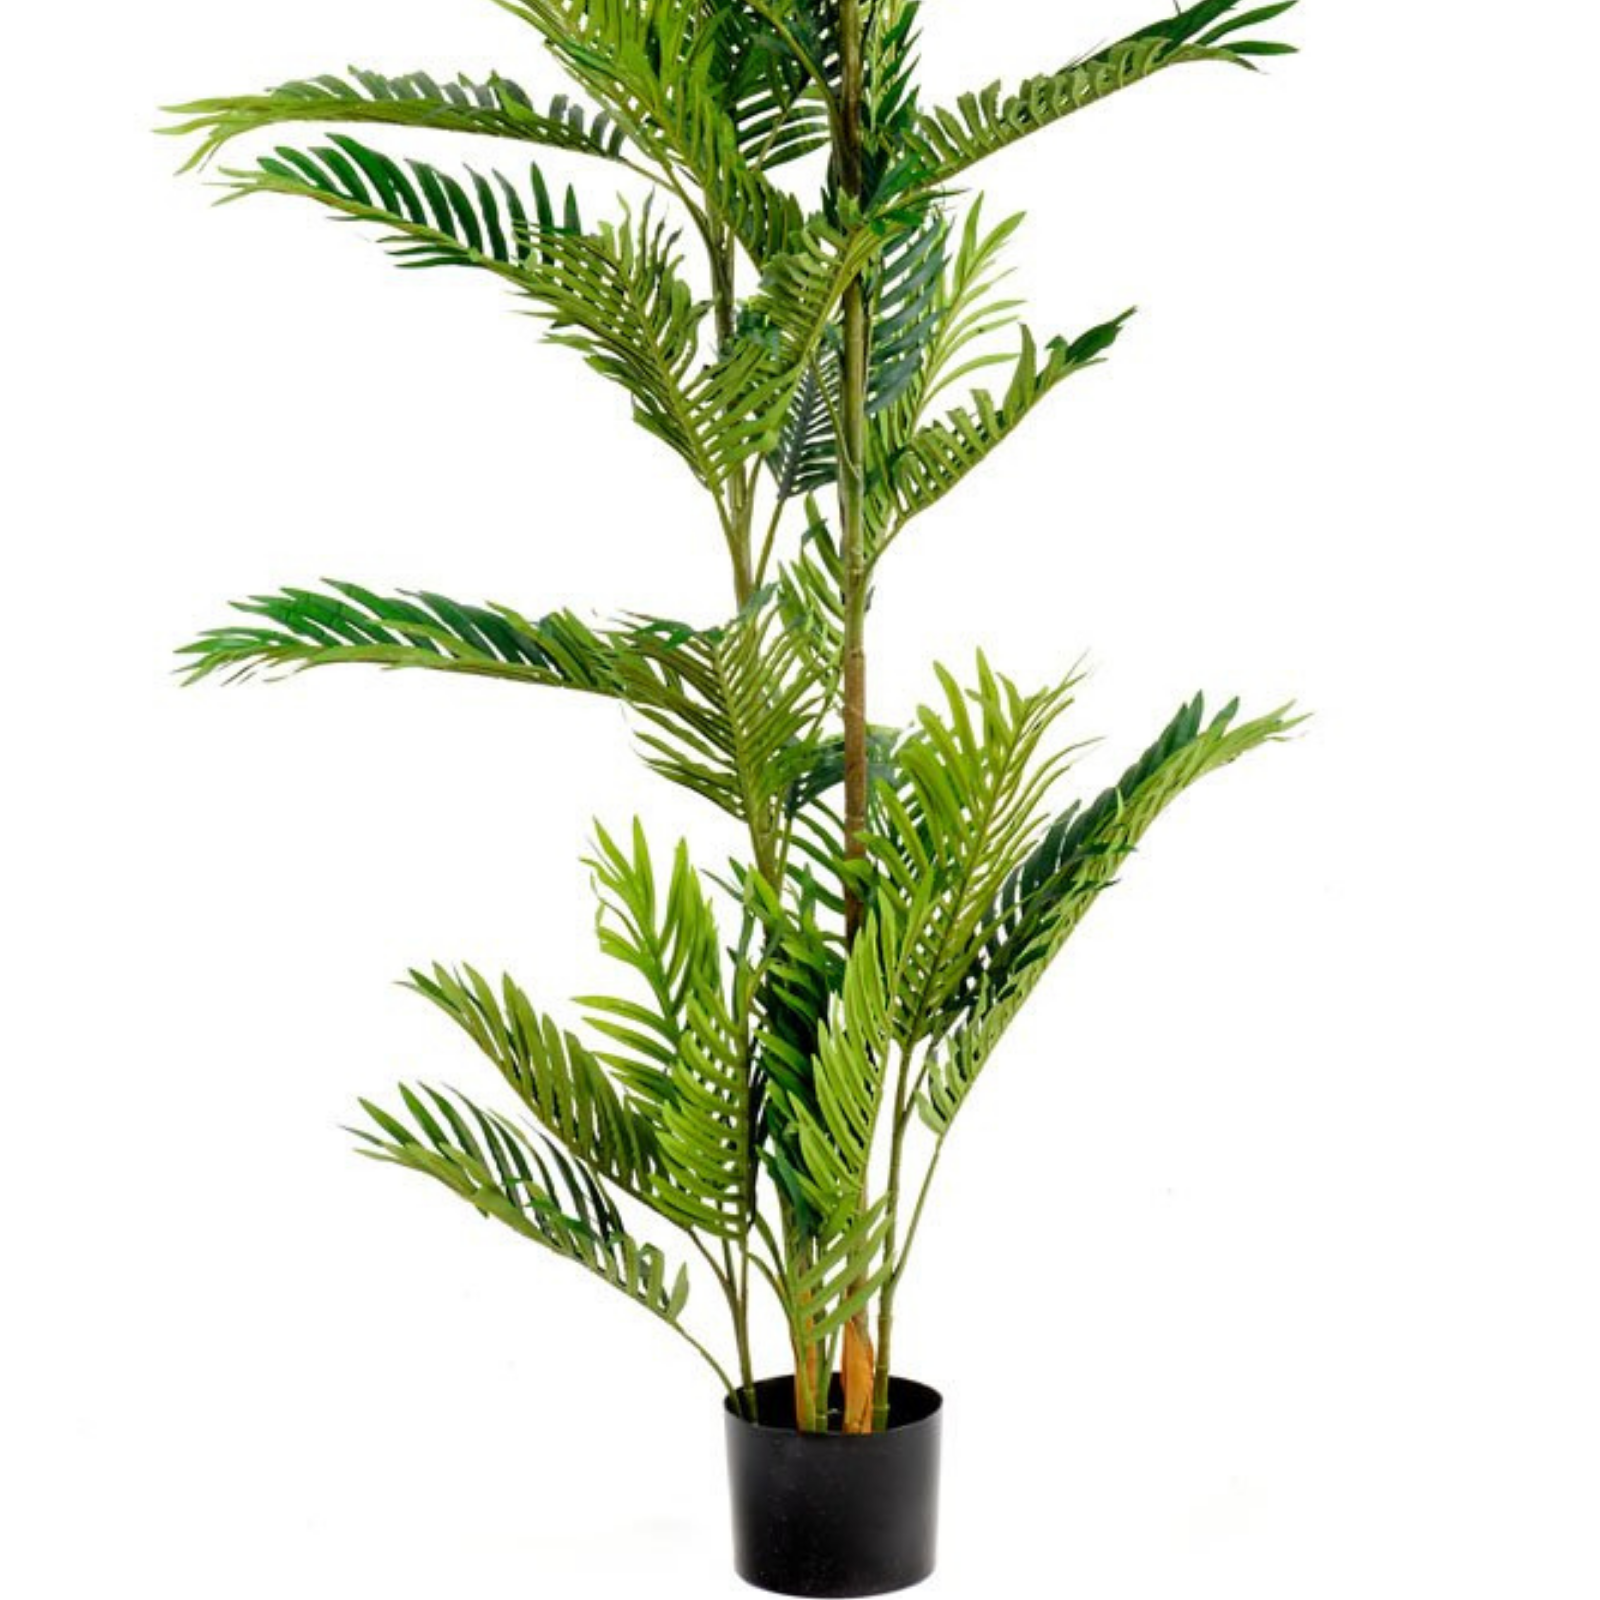 Artificial 5 foot Palm Tree